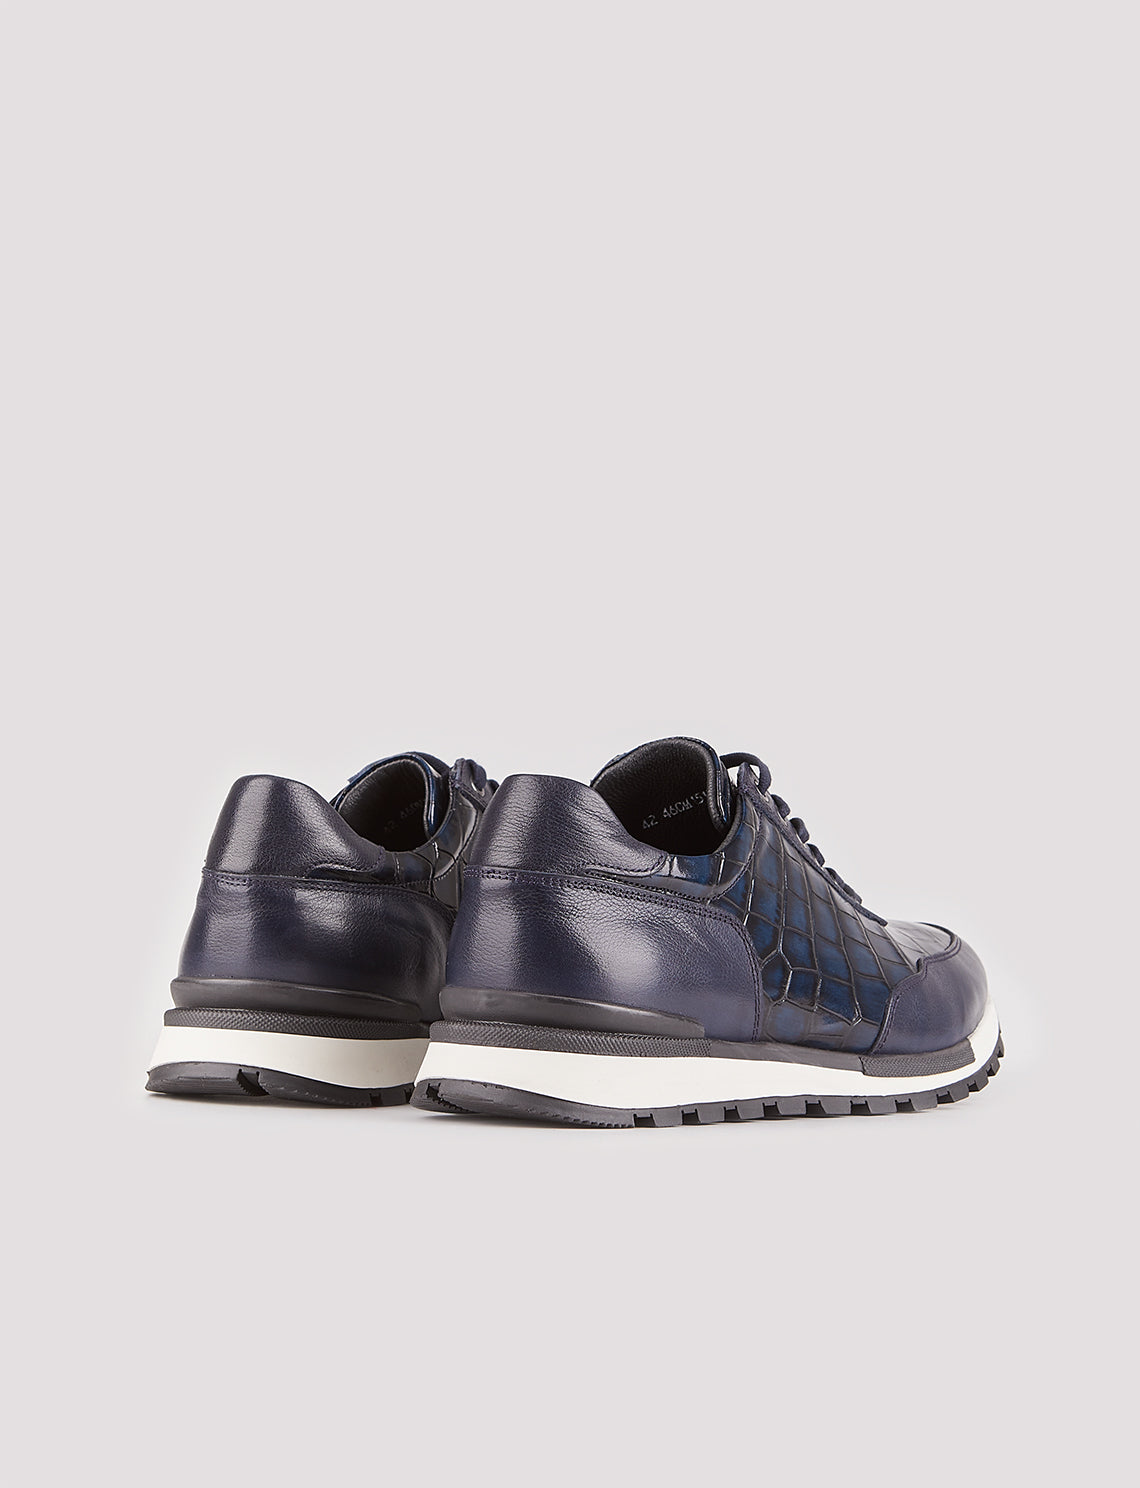 Men Navy Blue Genuine Leather Lace Up Sneakers